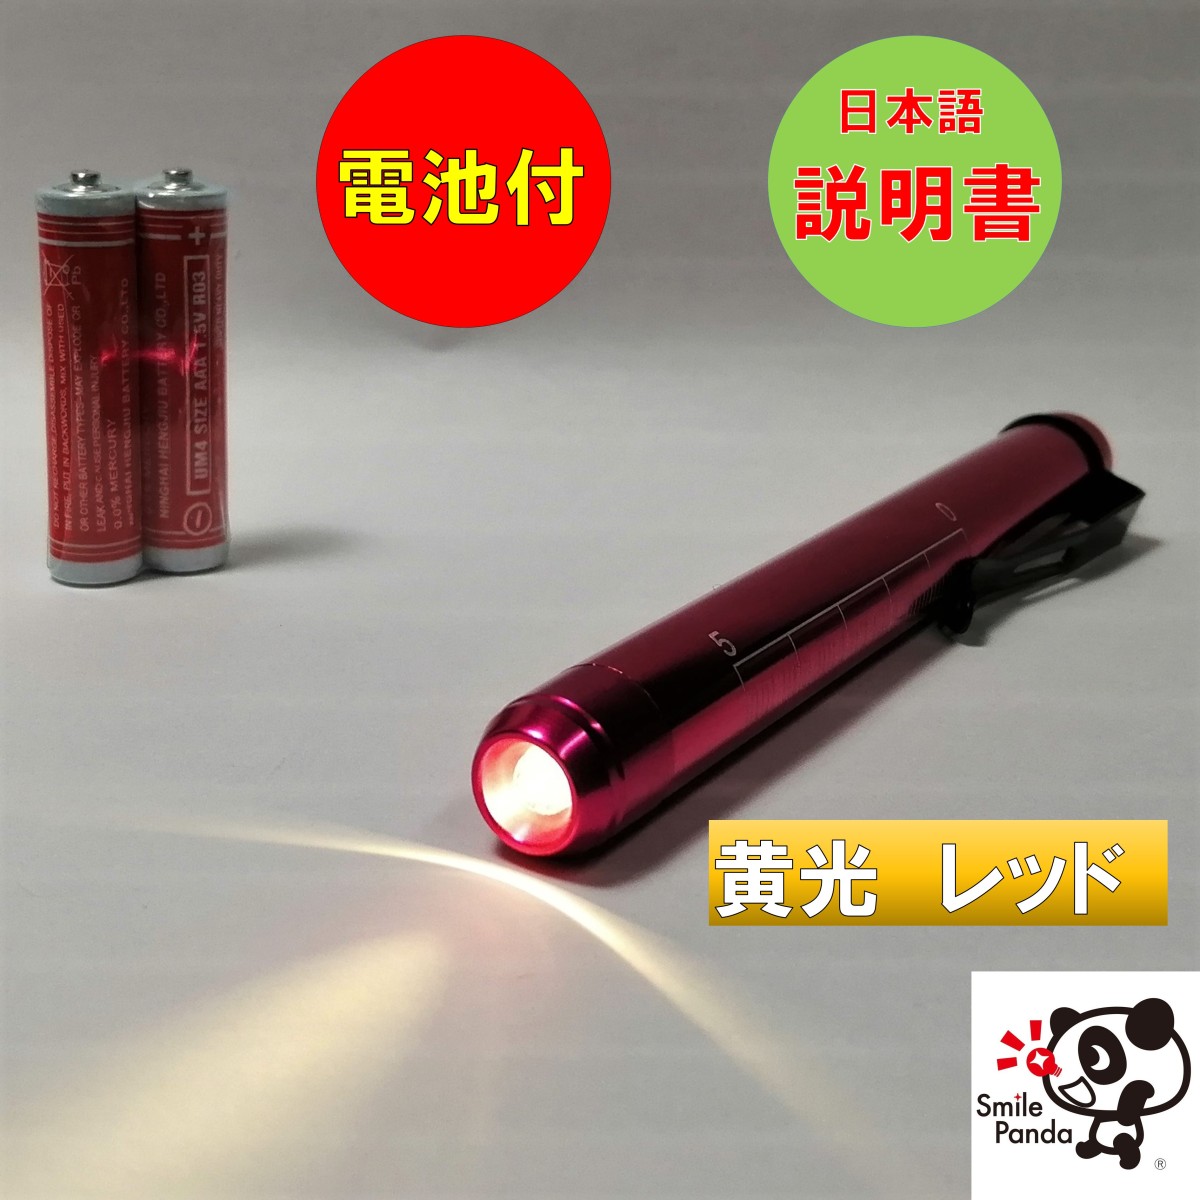  penlight medical care for battery installation settled is possible to choose yellow light white light . body color soft button knock type .. total scale attaching nurse nursing nursing ti service Point ..